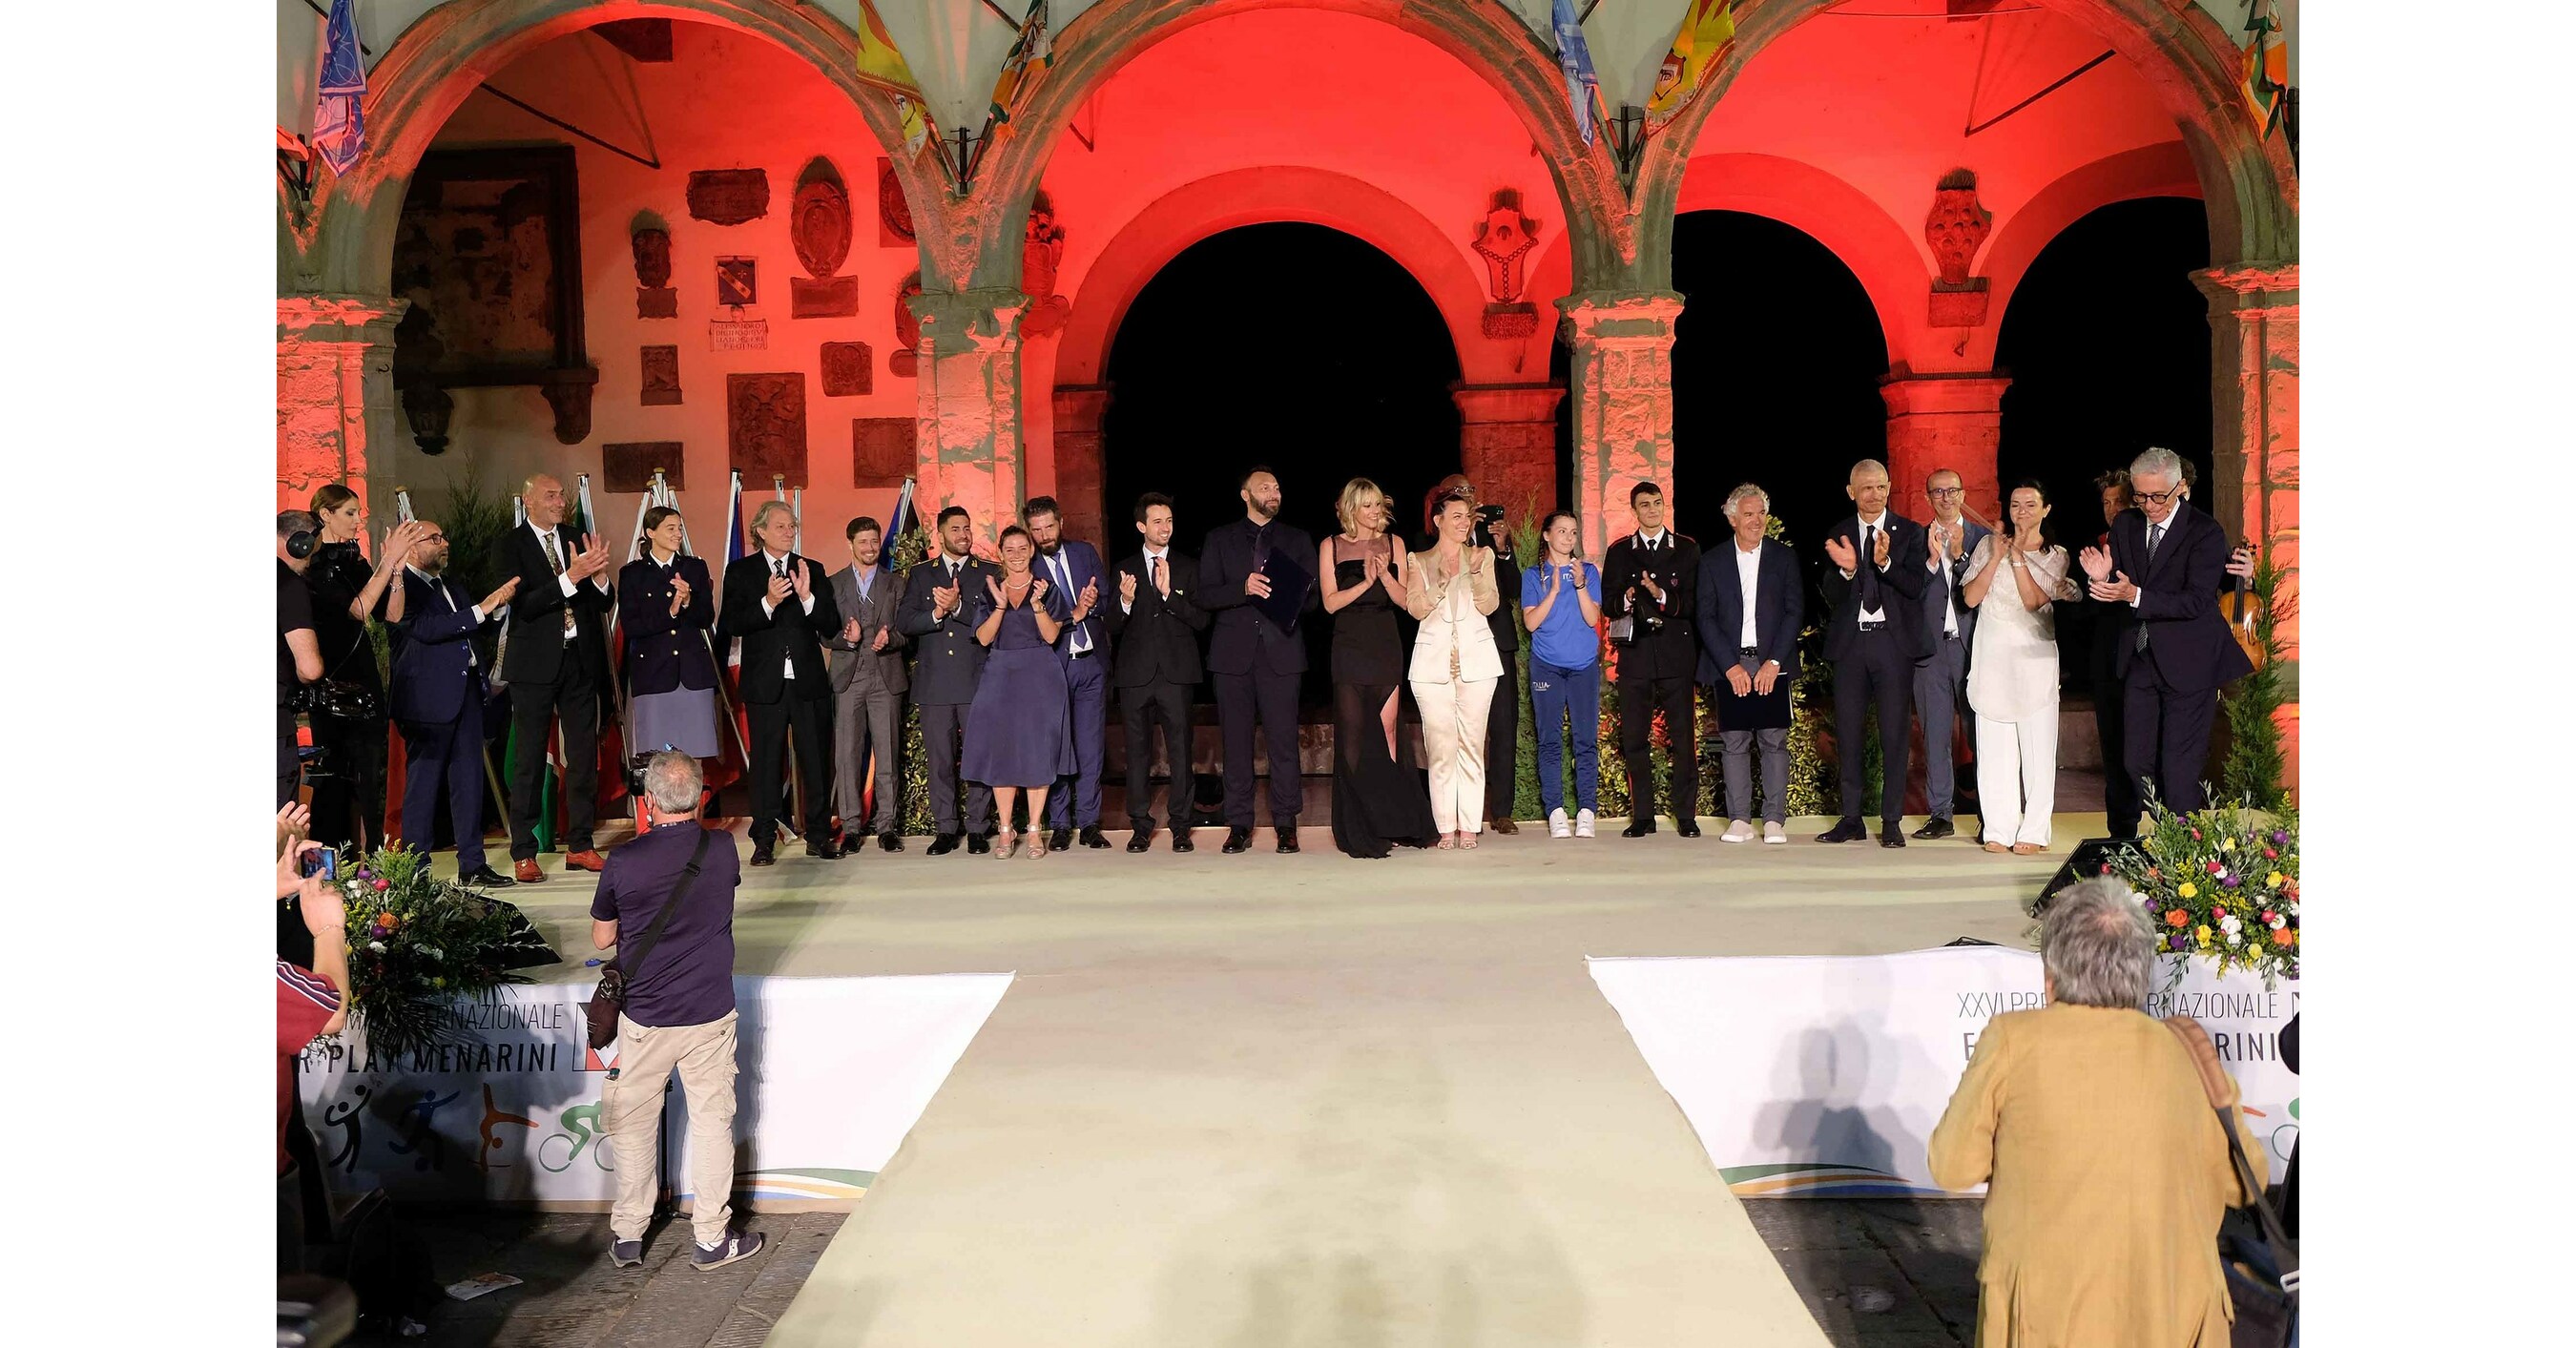 Fair Play Menarini International Awards, the 2023 edition starts with the talk show “The Champions tell their Stories” in Piazza della Signoria, Florence